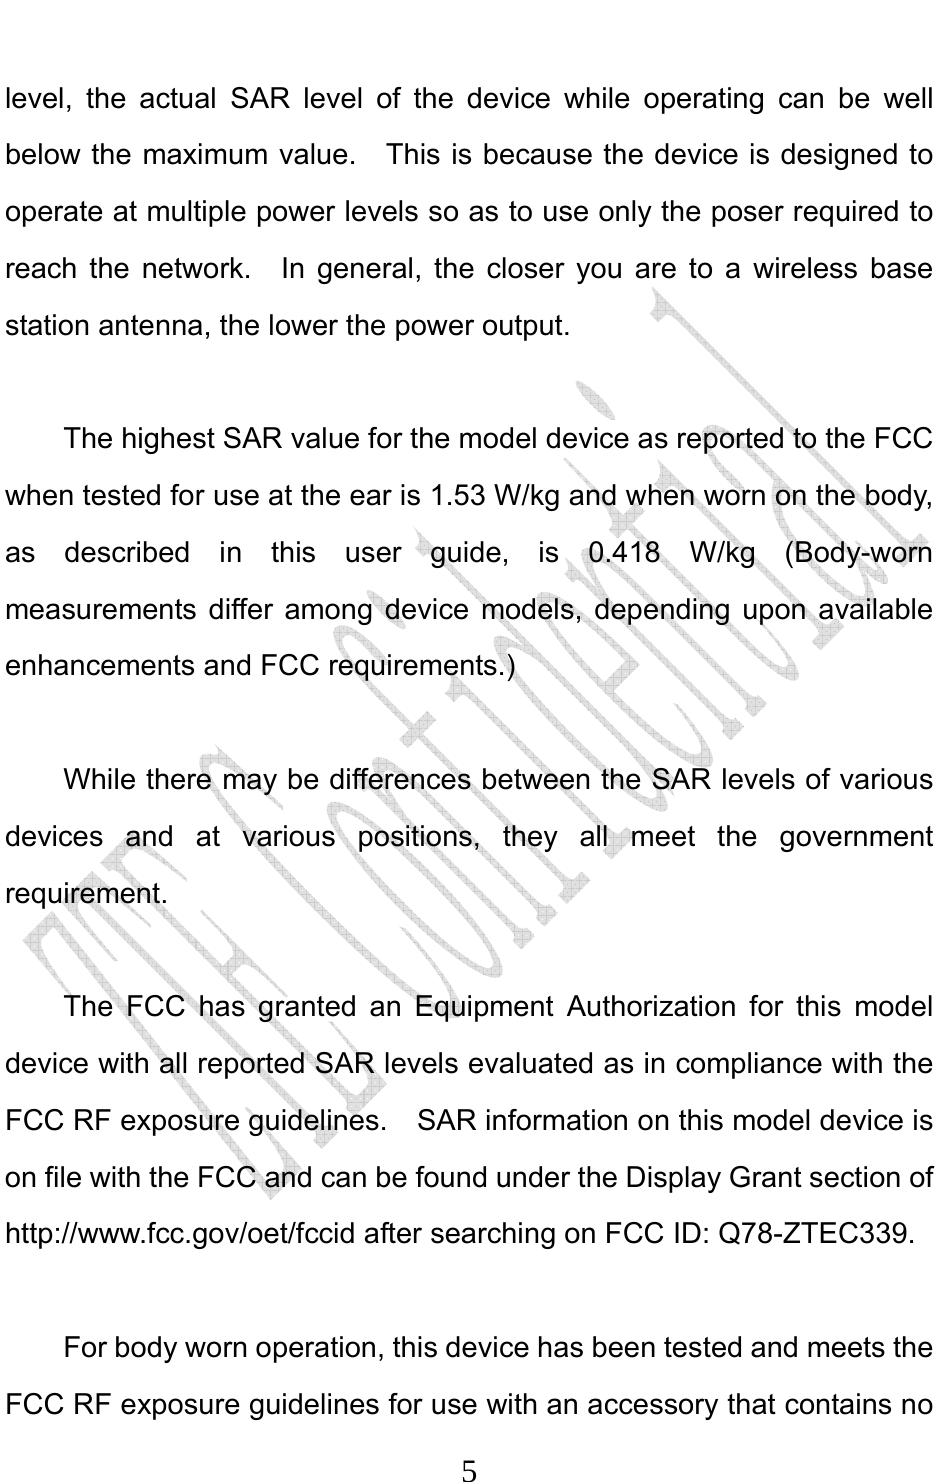                              5level, the actual SAR level of the device while operating can be well below the maximum value.  This is because the device is designed to operate at multiple power levels so as to use only the poser required to reach the network.  In general, the closer you are to a wireless base station antenna, the lower the power output.  The highest SAR value for the model device as reported to the FCC when tested for use at the ear is 1.53 W/kg and when worn on the body, as described in this user guide, is 0.418 W/kg (Body-worn measurements differ among device models, depending upon available enhancements and FCC requirements.)  While there may be differences between the SAR levels of various devices and at various positions, they all meet the government requirement.  The FCC has granted an Equipment Authorization for this model device with all reported SAR levels evaluated as in compliance with the FCC RF exposure guidelines.  SAR information on this model device is on file with the FCC and can be found under the Display Grant section of http://www.fcc.gov/oet/fccid after searching on FCC ID: Q78-ZTEC339.  For body worn operation, this device has been tested and meets the FCC RF exposure guidelines for use with an accessory that contains no 